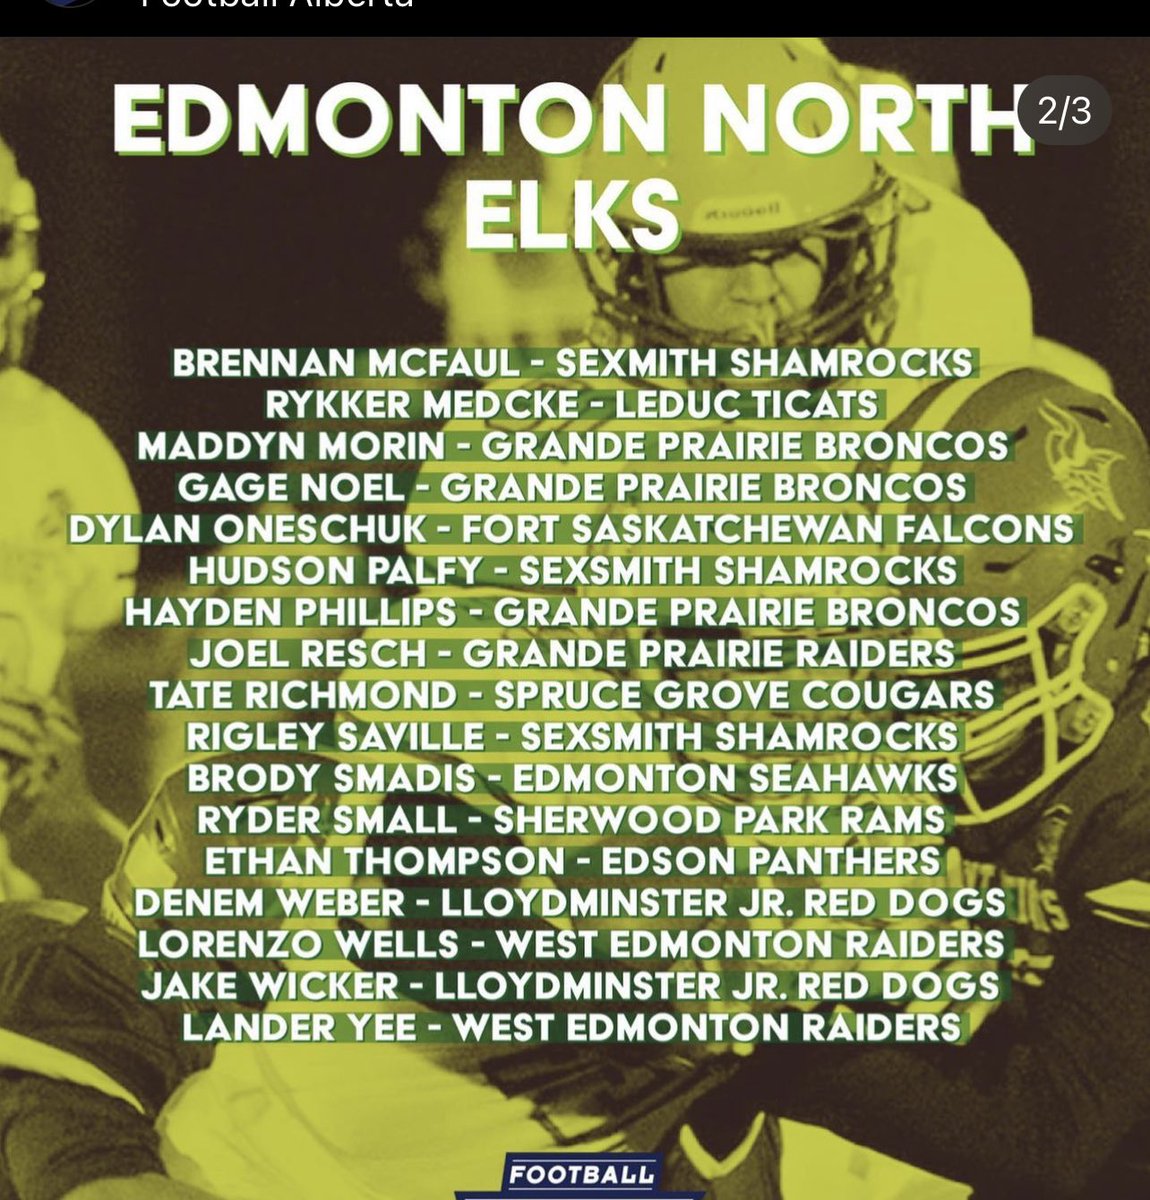 Let’s goooo can’t wait to get to work with the Edmonton north Elks 💪💪🦌🦌